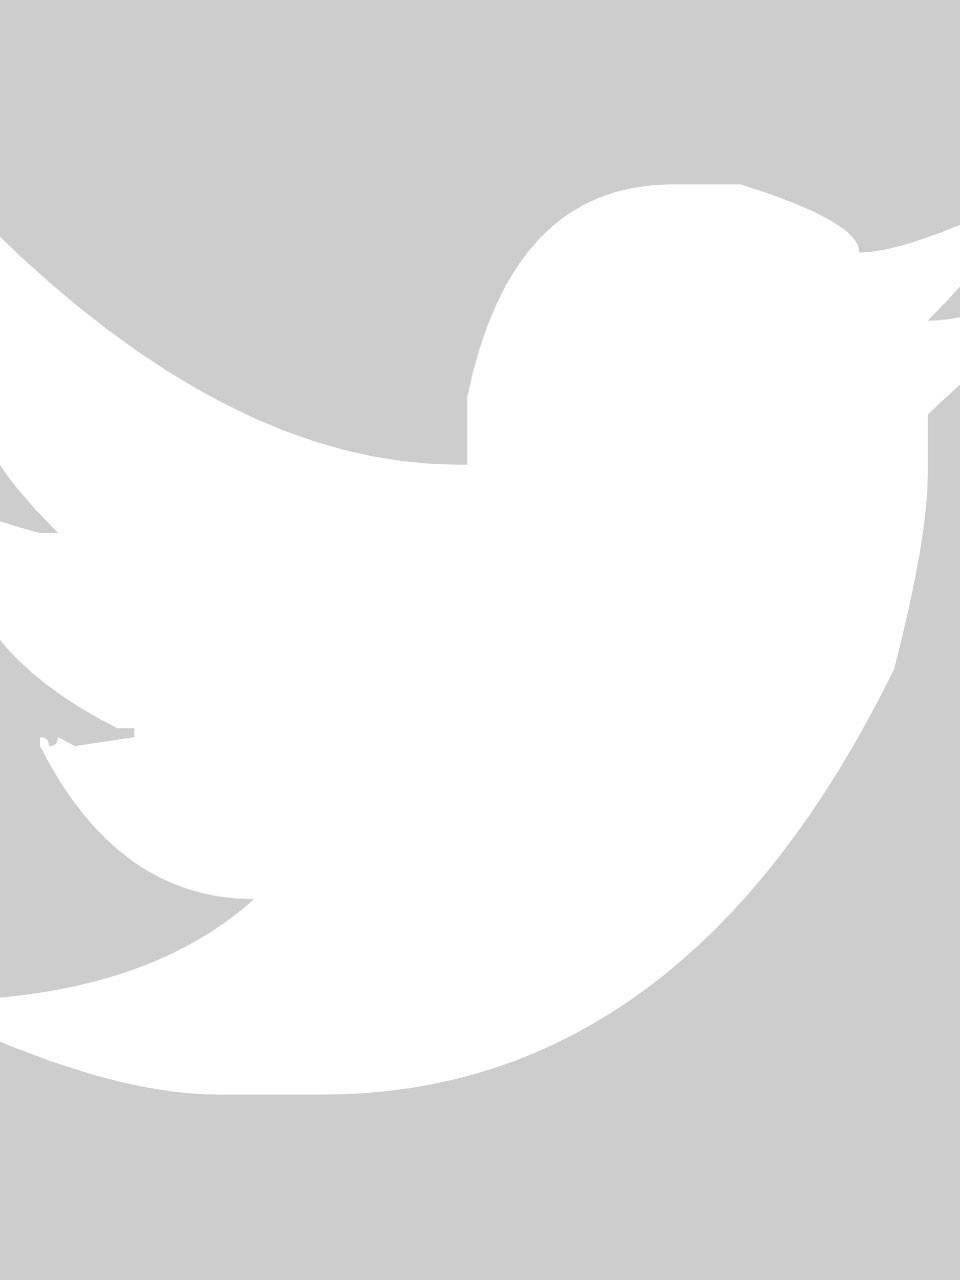 ultimate twitter tips for your profile